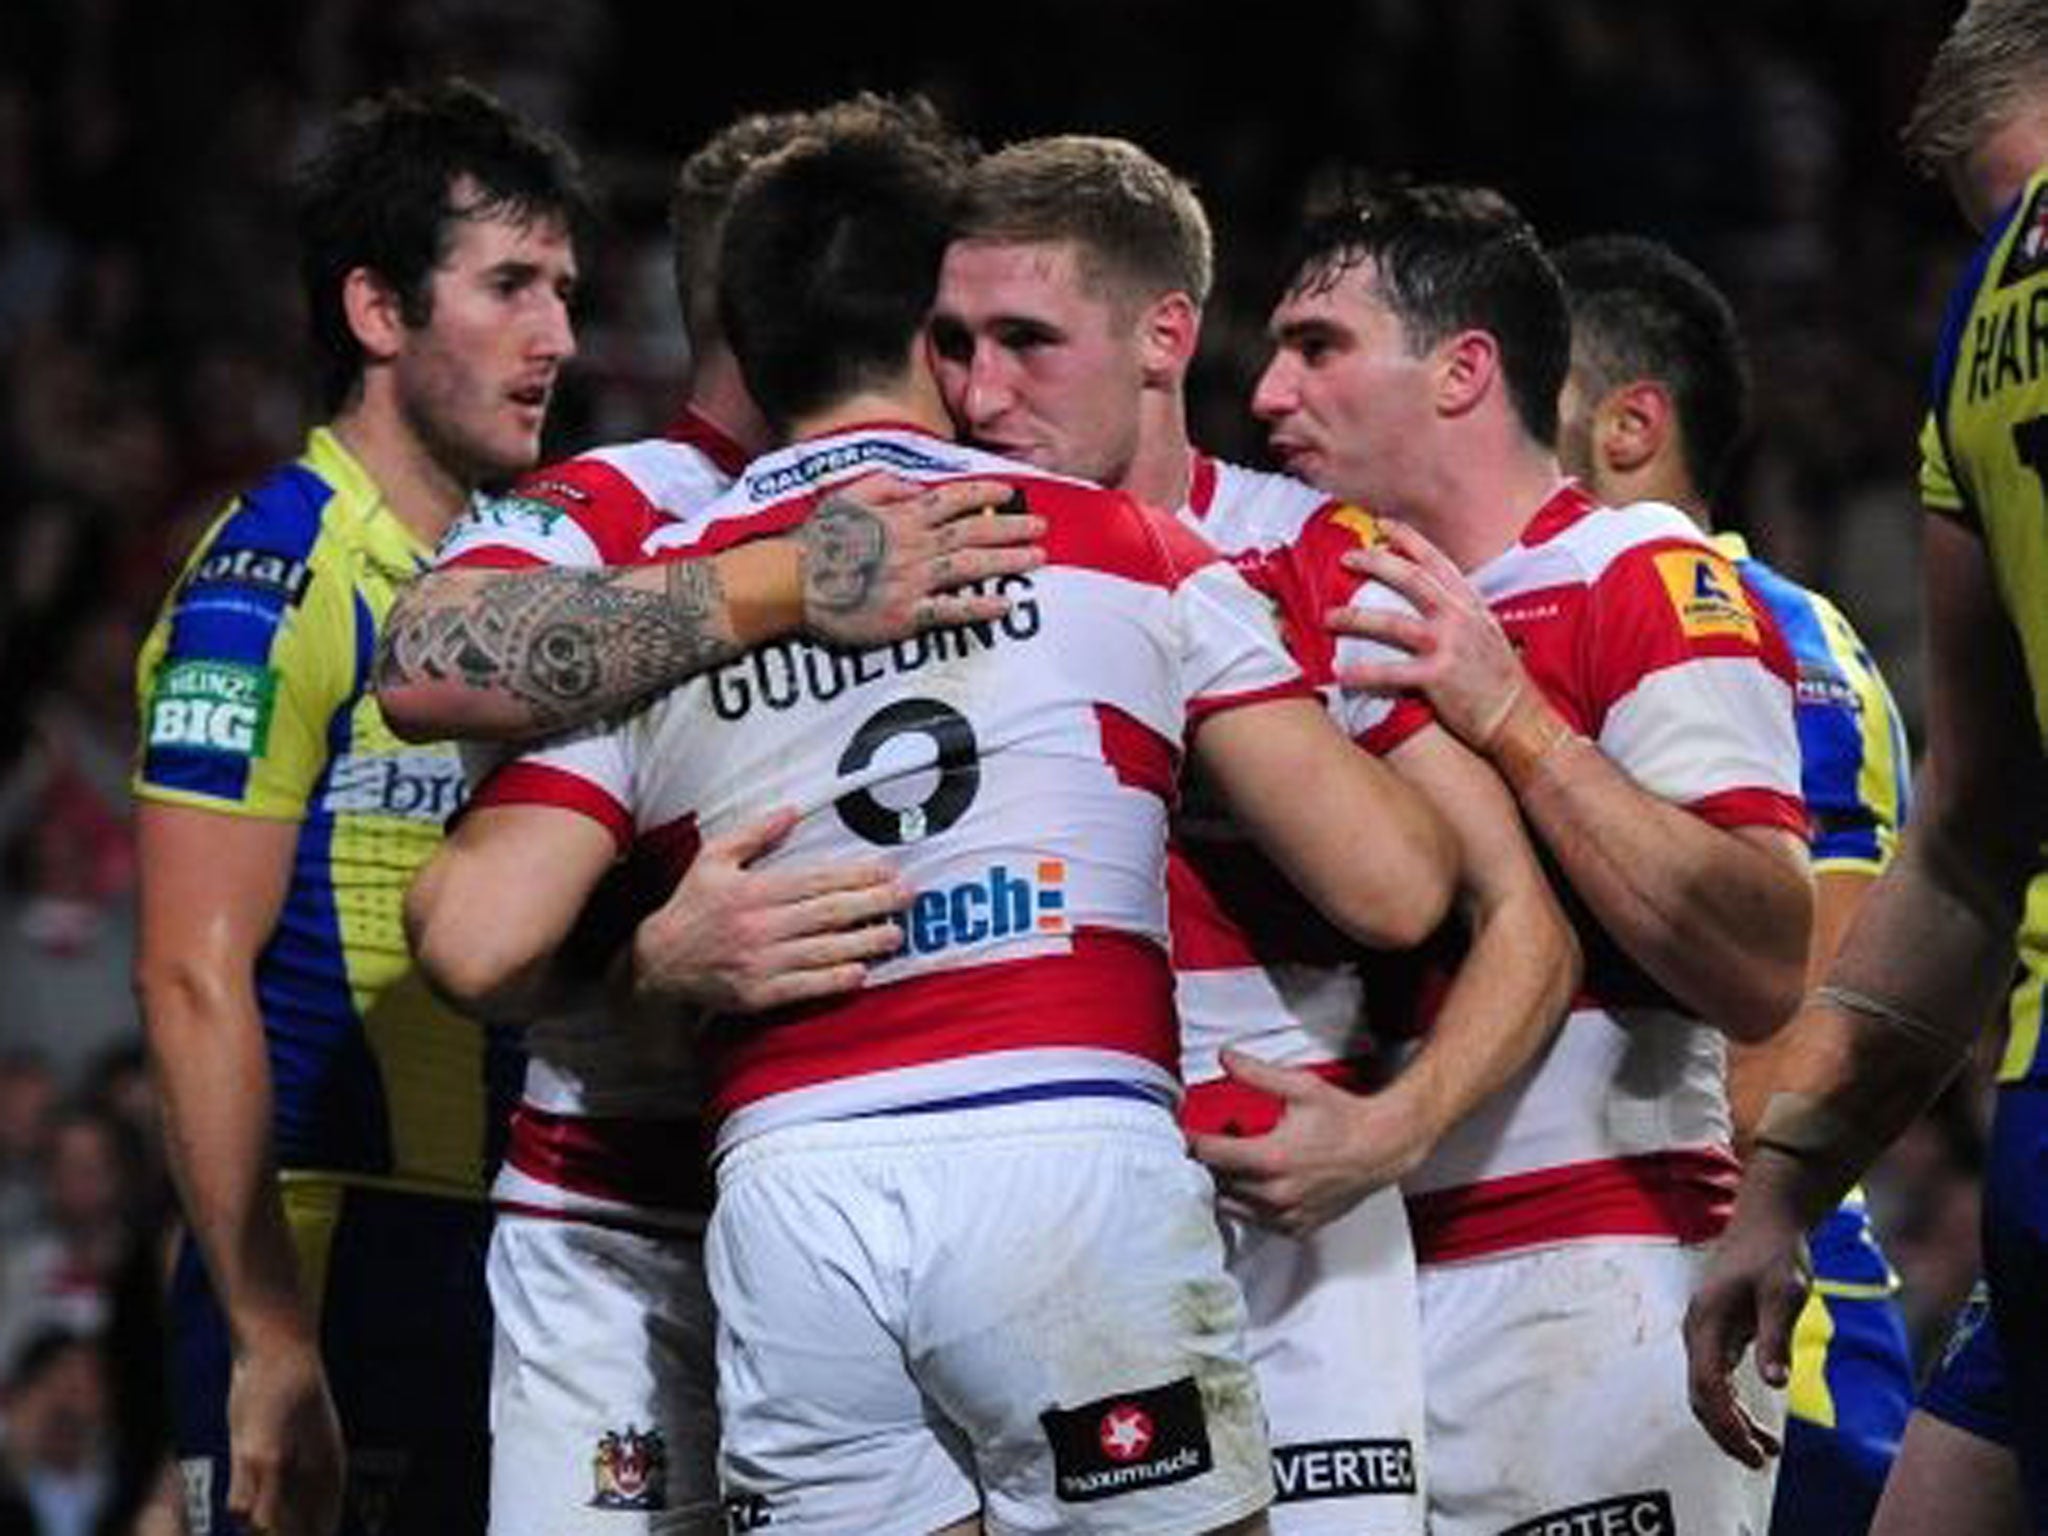 Golden goodbye: Sam Tomkins could not stop Ben Westwood but celebrated Goulding’s try, to young fans’ joy